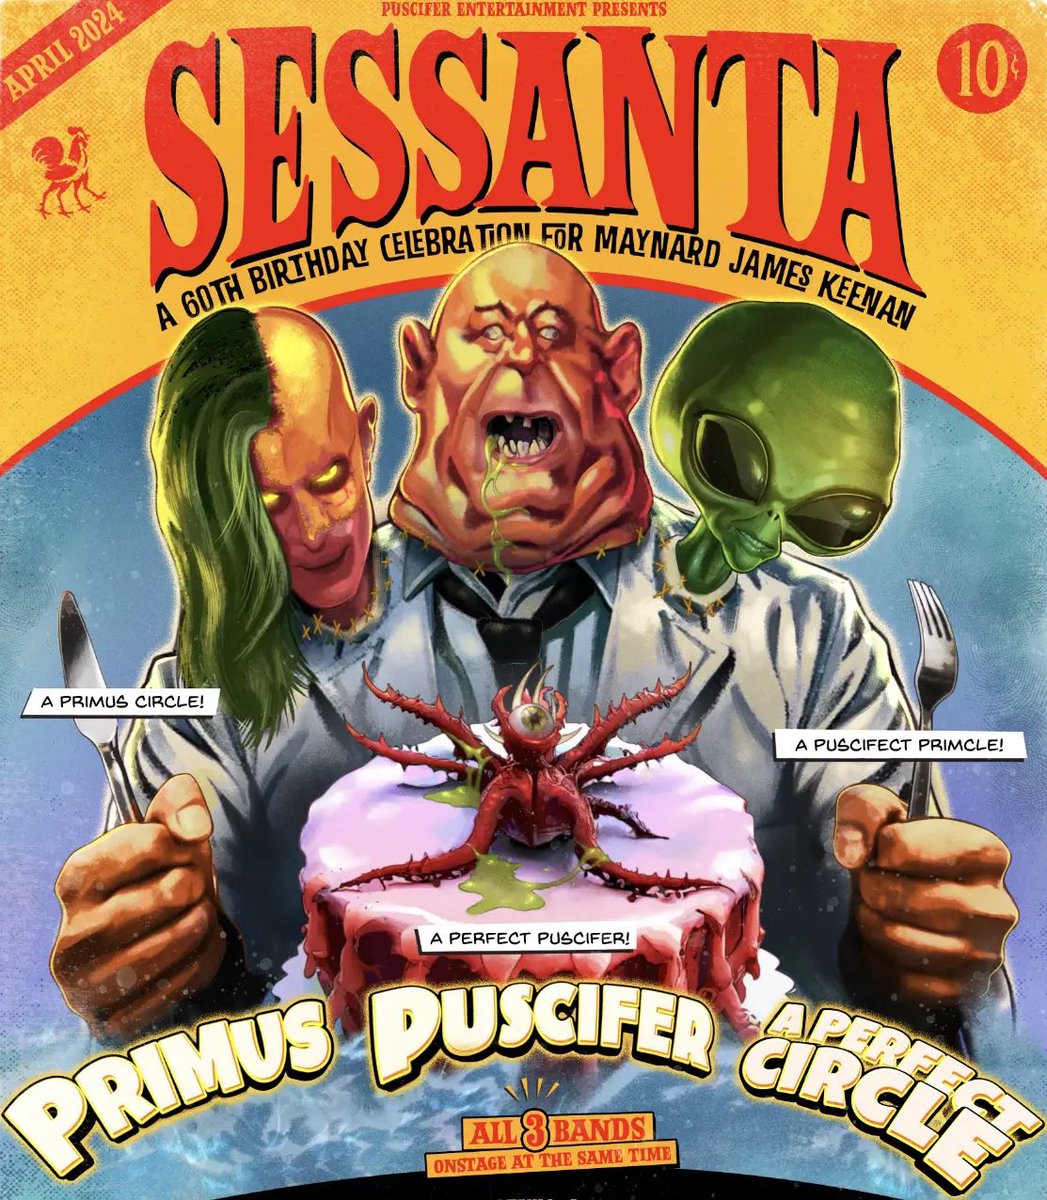 Are you ready #Berkley ! @mjkeenan’s #Sessanta Birthday Celebration continues tonight at the @Greek_Theatre w/ @primus @puscifer & @aperfectcircle !